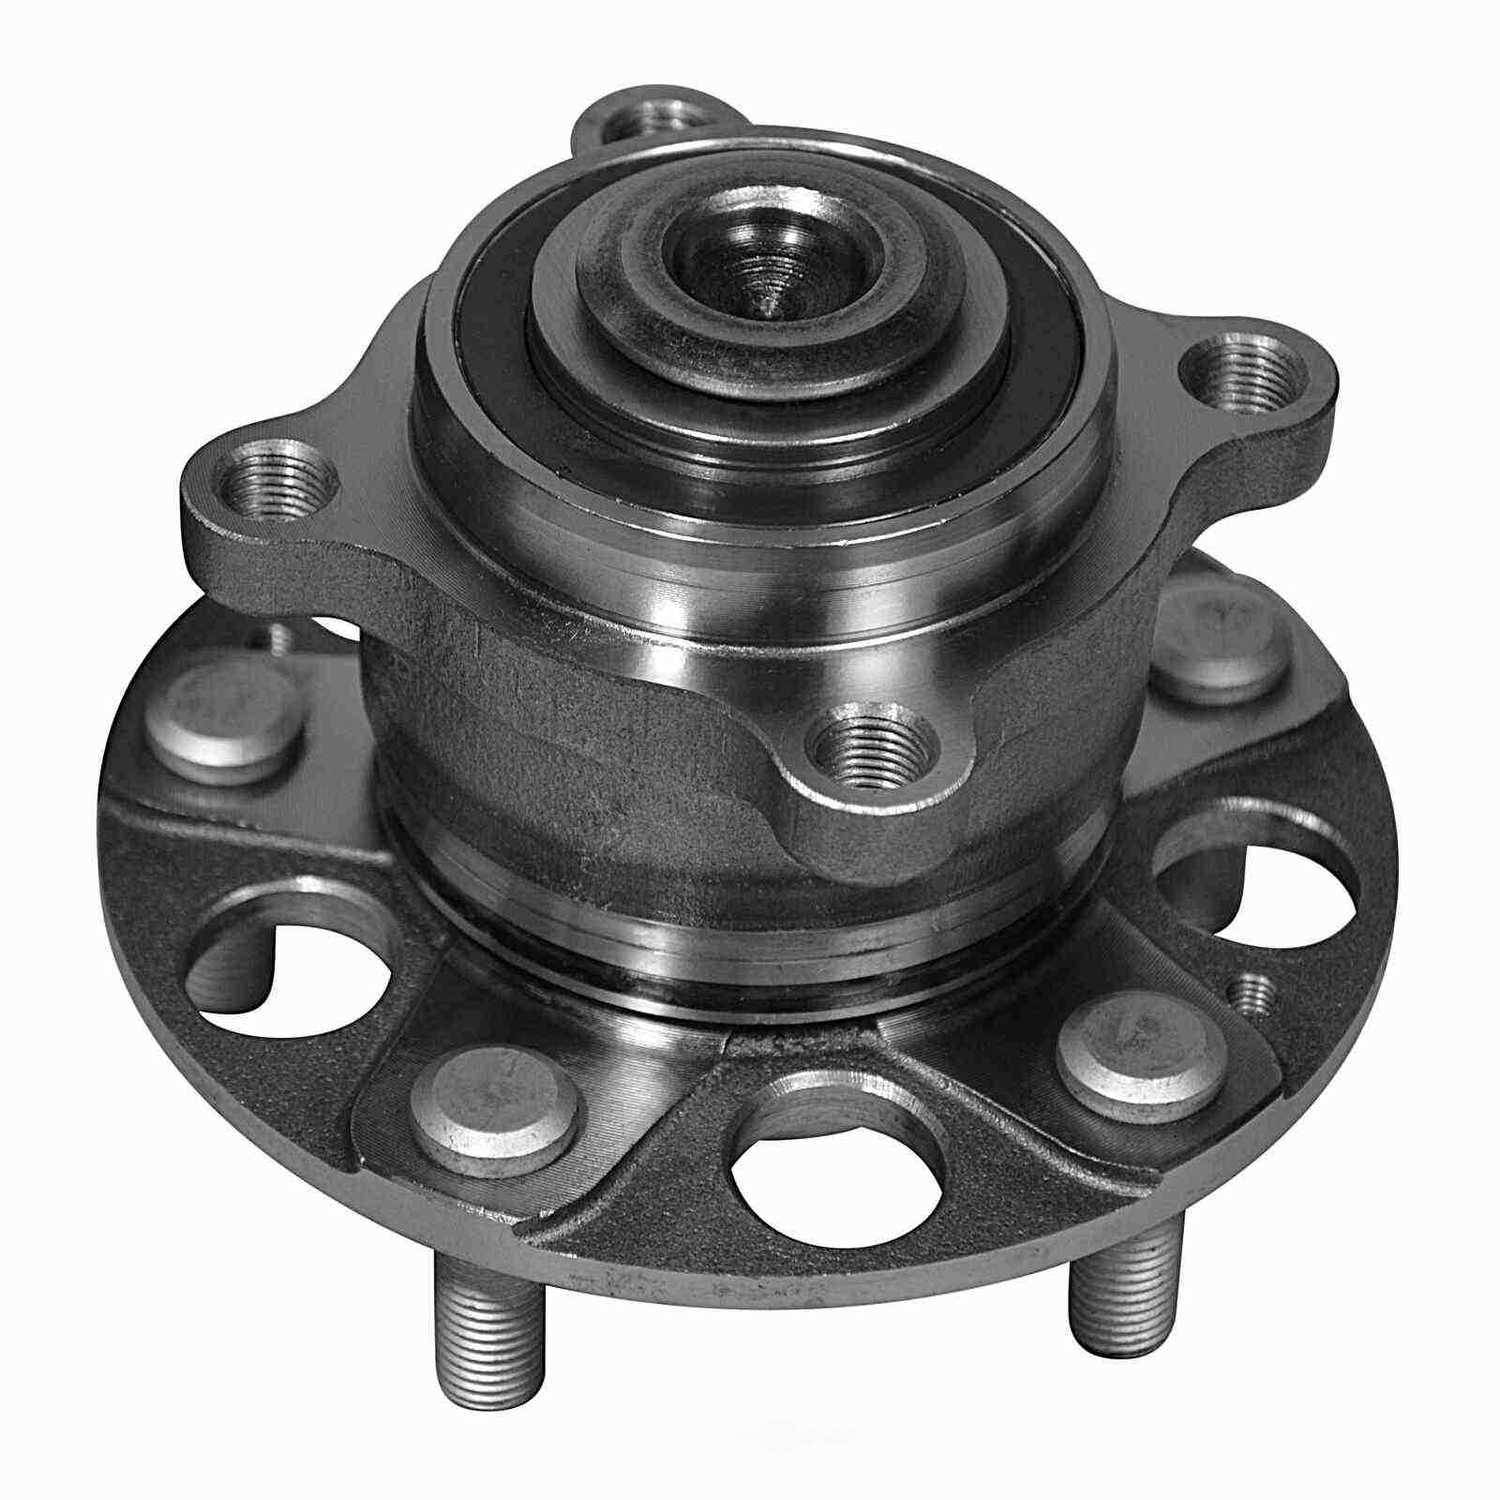 GSP NORTH AMERICA INC. - GSP New Wheel Bearing and Hub Assembly (Rear) - AD8 213353